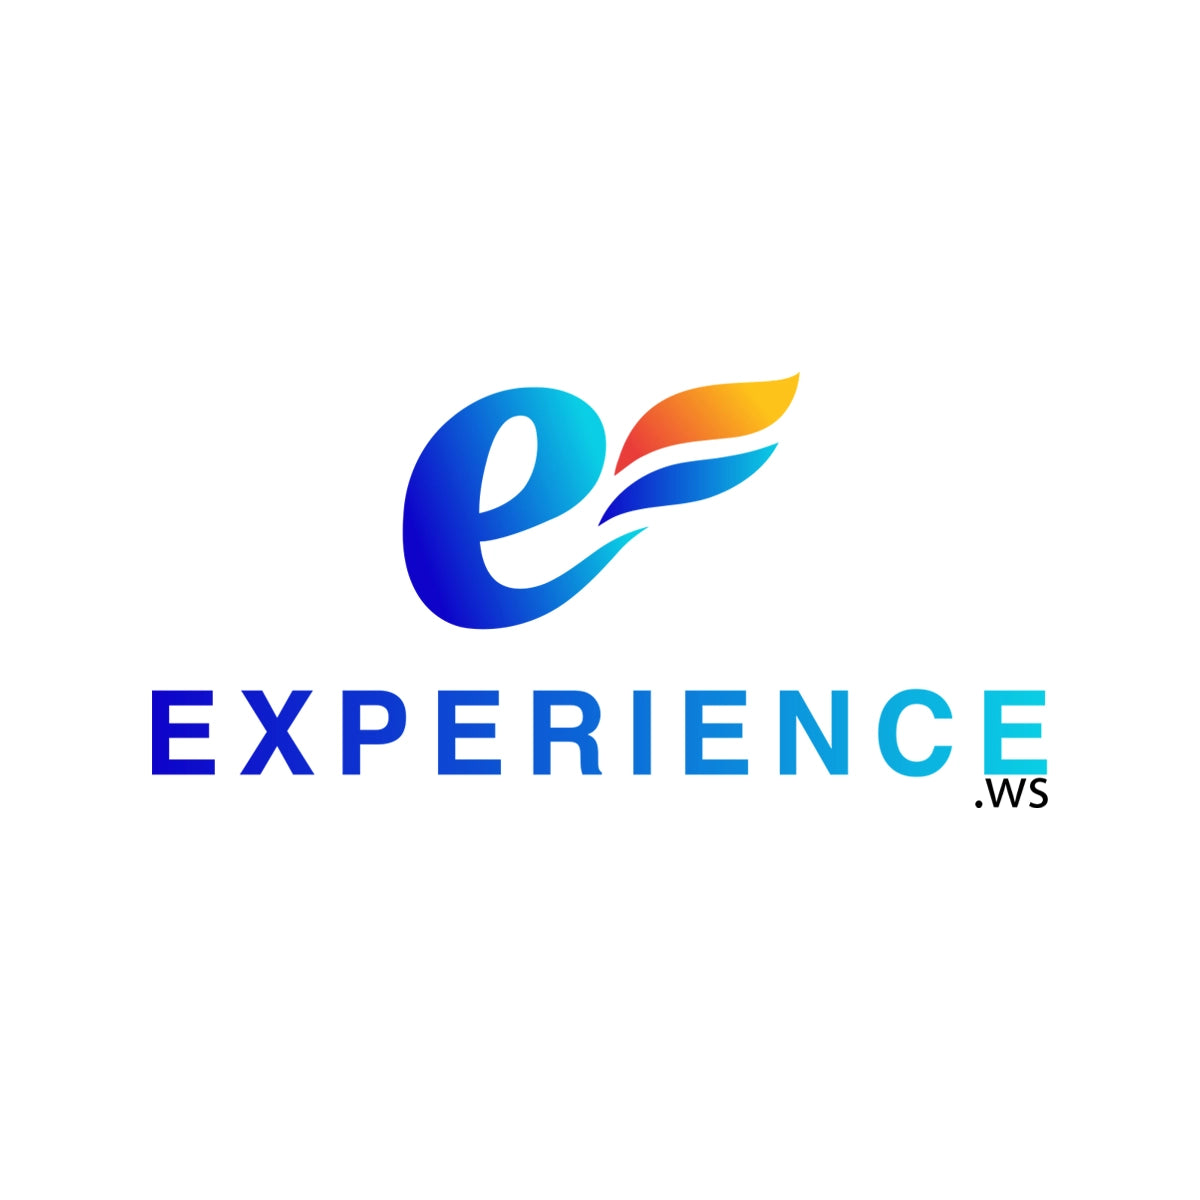 EXPERIENCE.WS